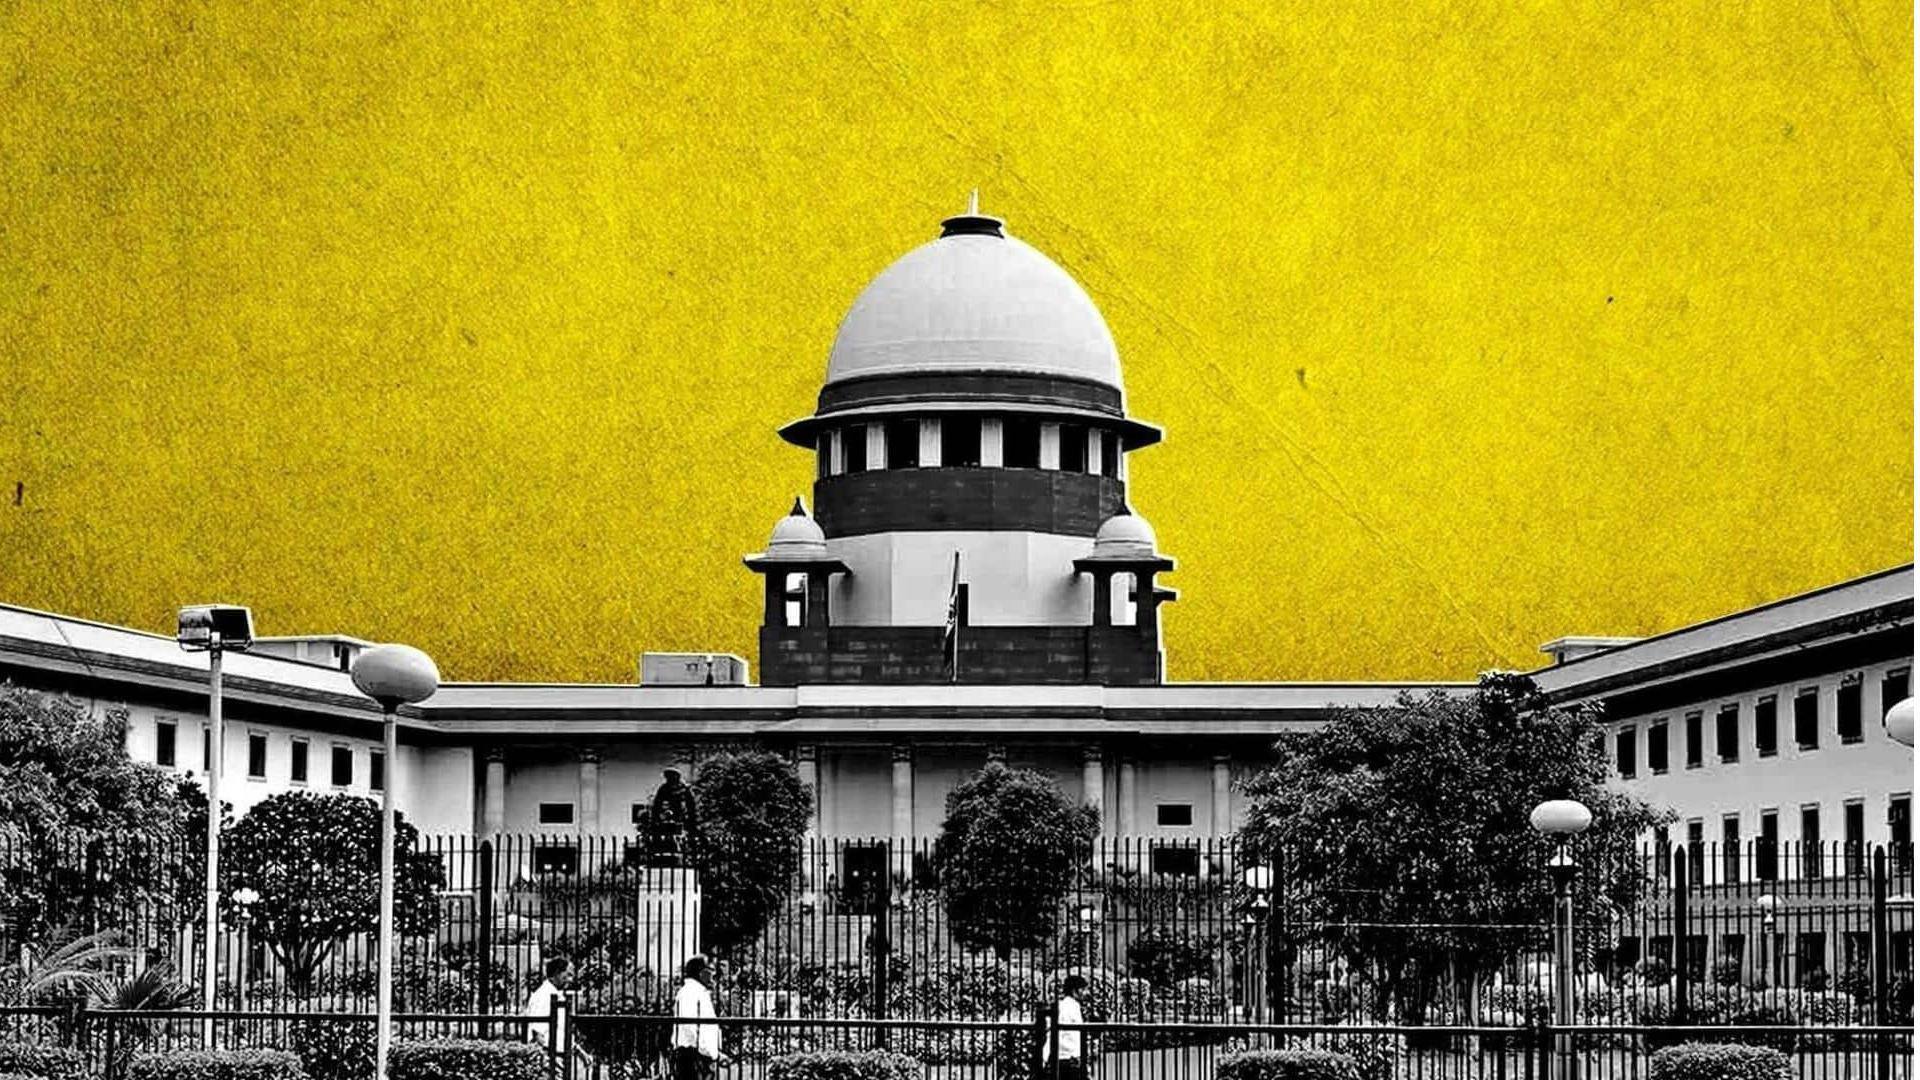 Homemaker's work no less than salary-earning spouse's, says Supreme Court